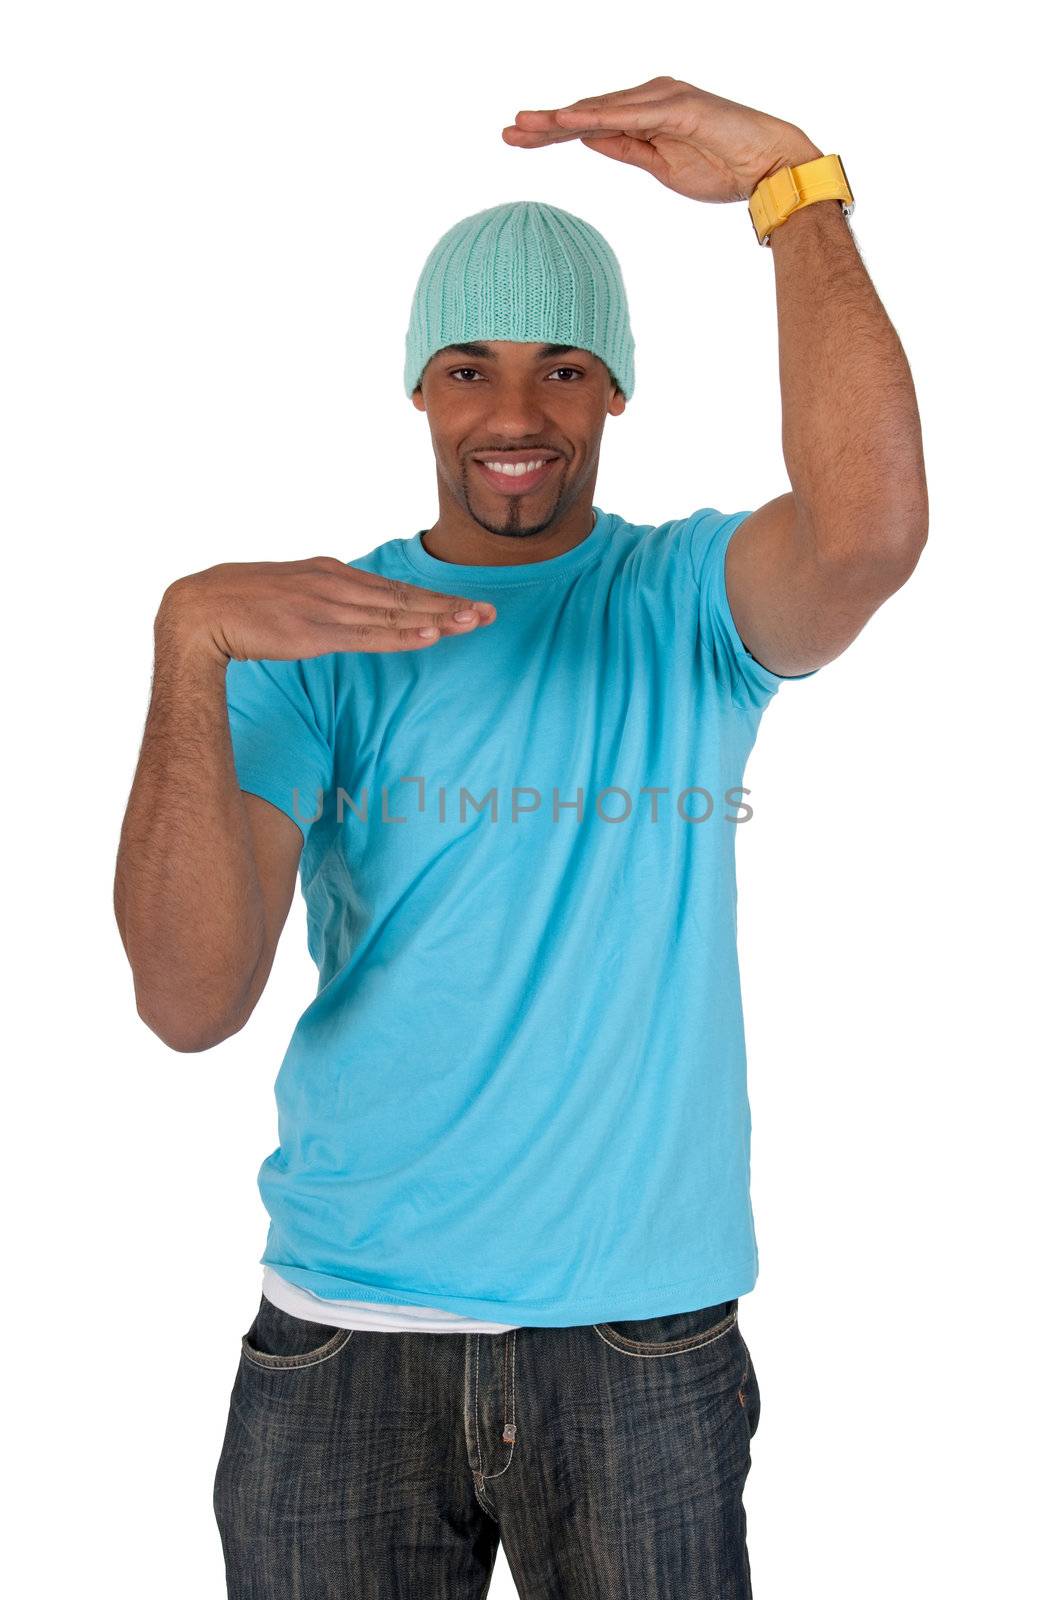 Young guy in a blue t-shirt making a frame with his arms. Isolated on white background.